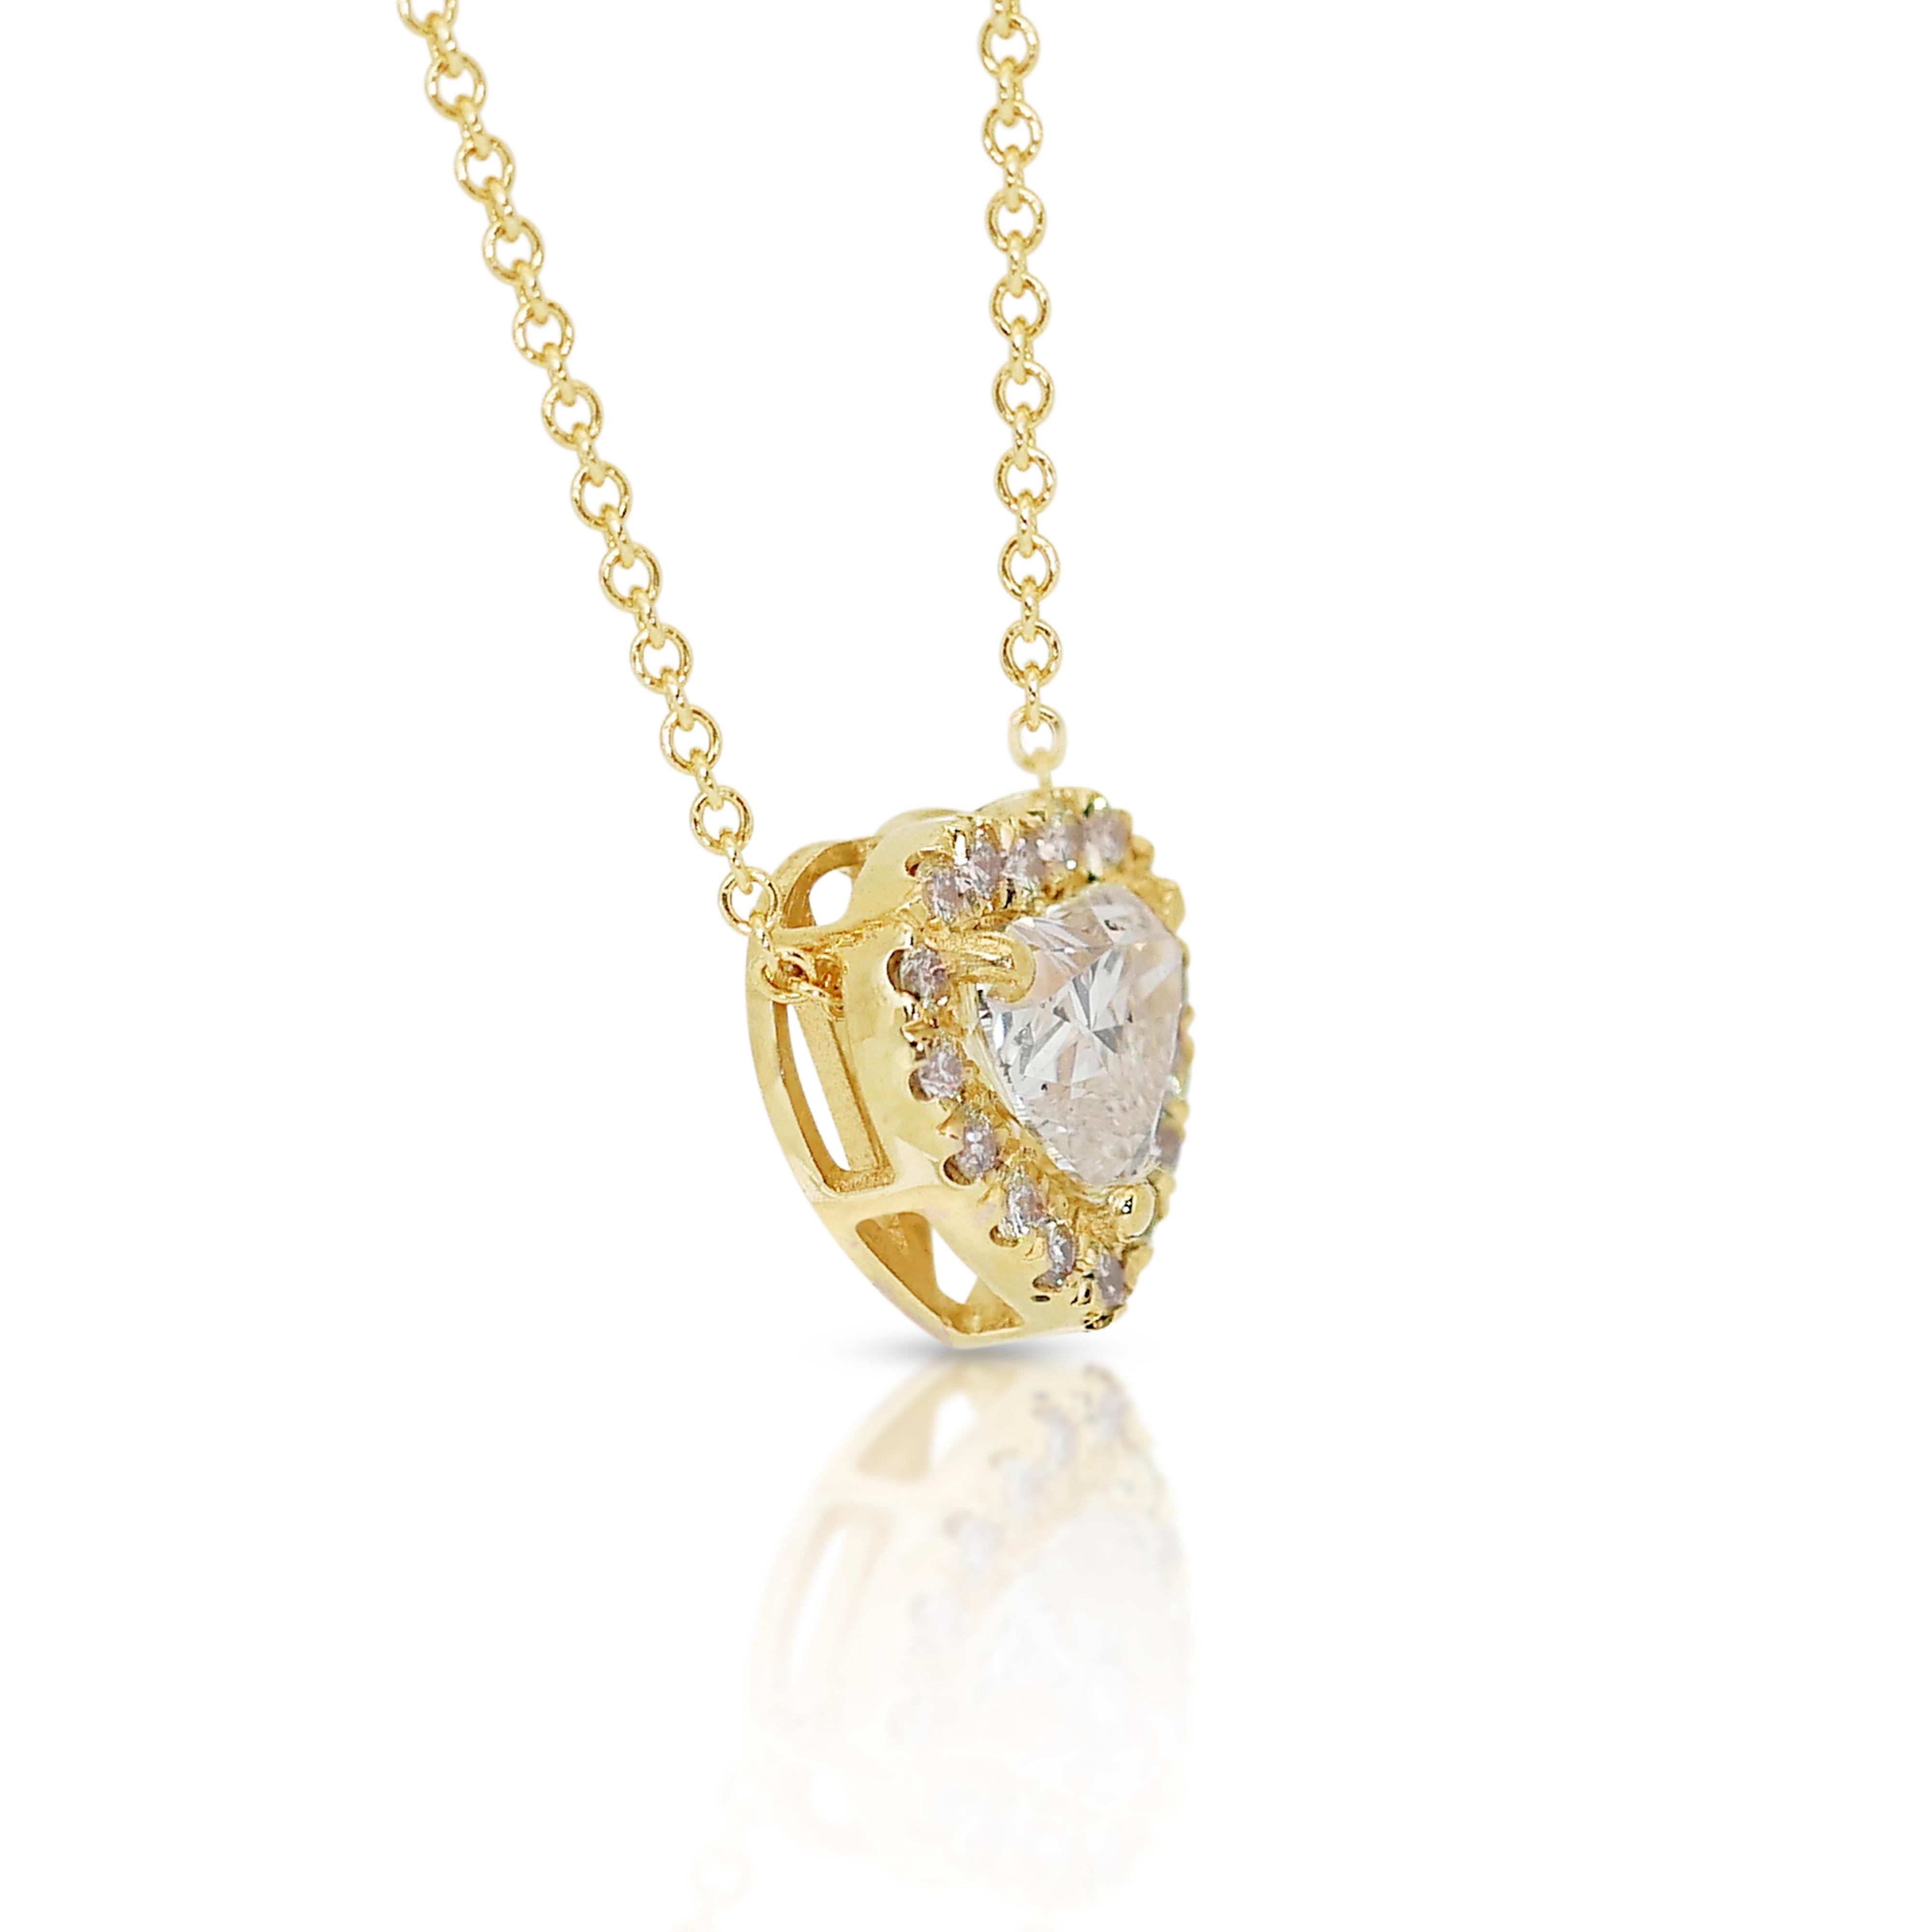 Heart Cut Brilliant 1.28ct Diamonds Halo Necklace in 18k Yellow Gold - IGI Certified For Sale